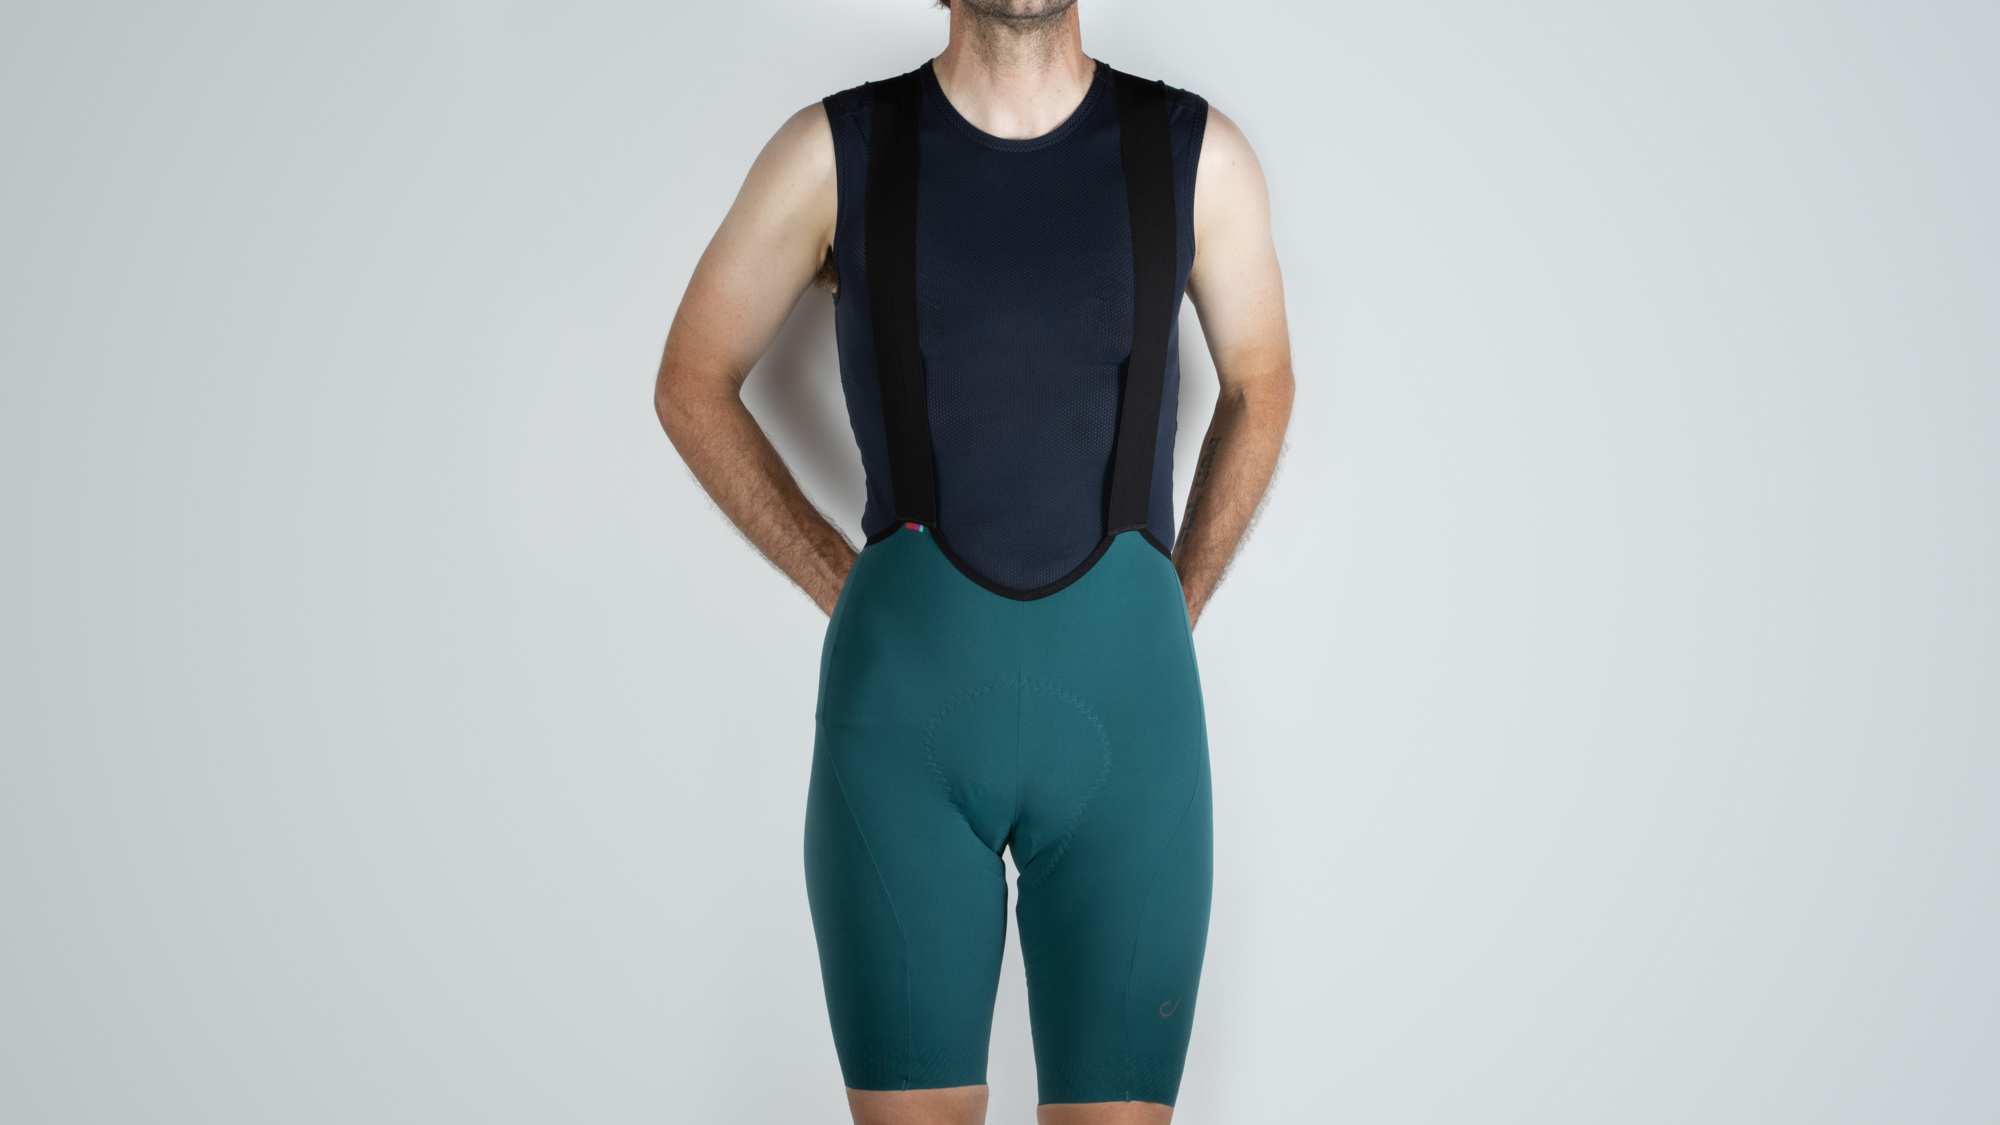 Velocio Luxe cycling bib shorts review: As close to perfect as you